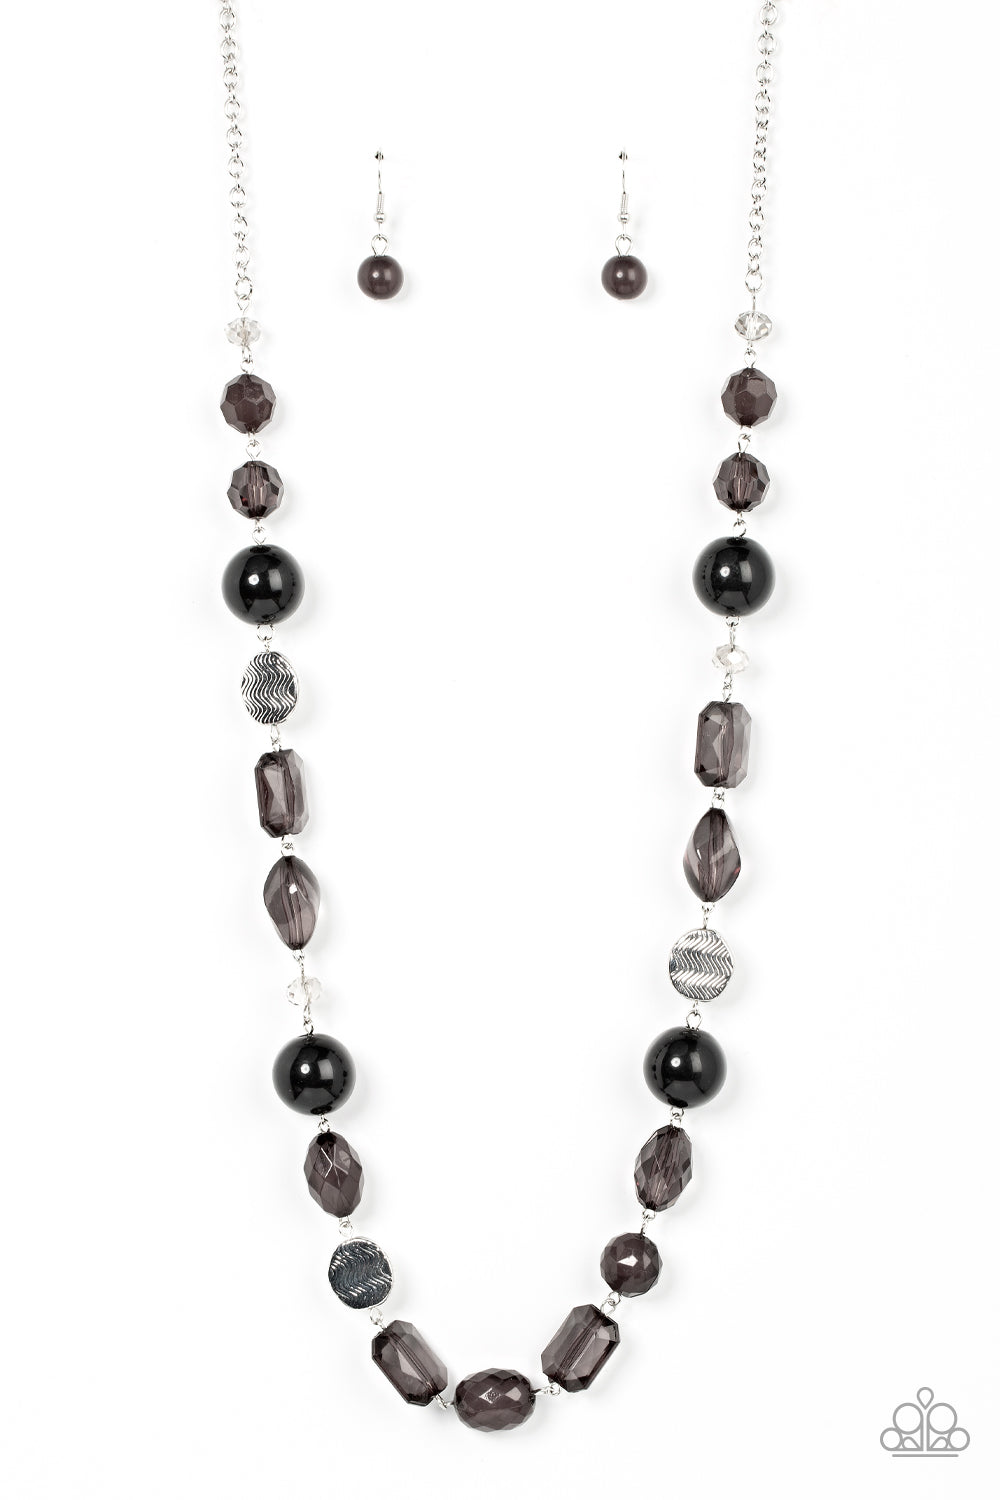 Timelessly Tailored Paparazzi Accessories Necklace with Earrings Black